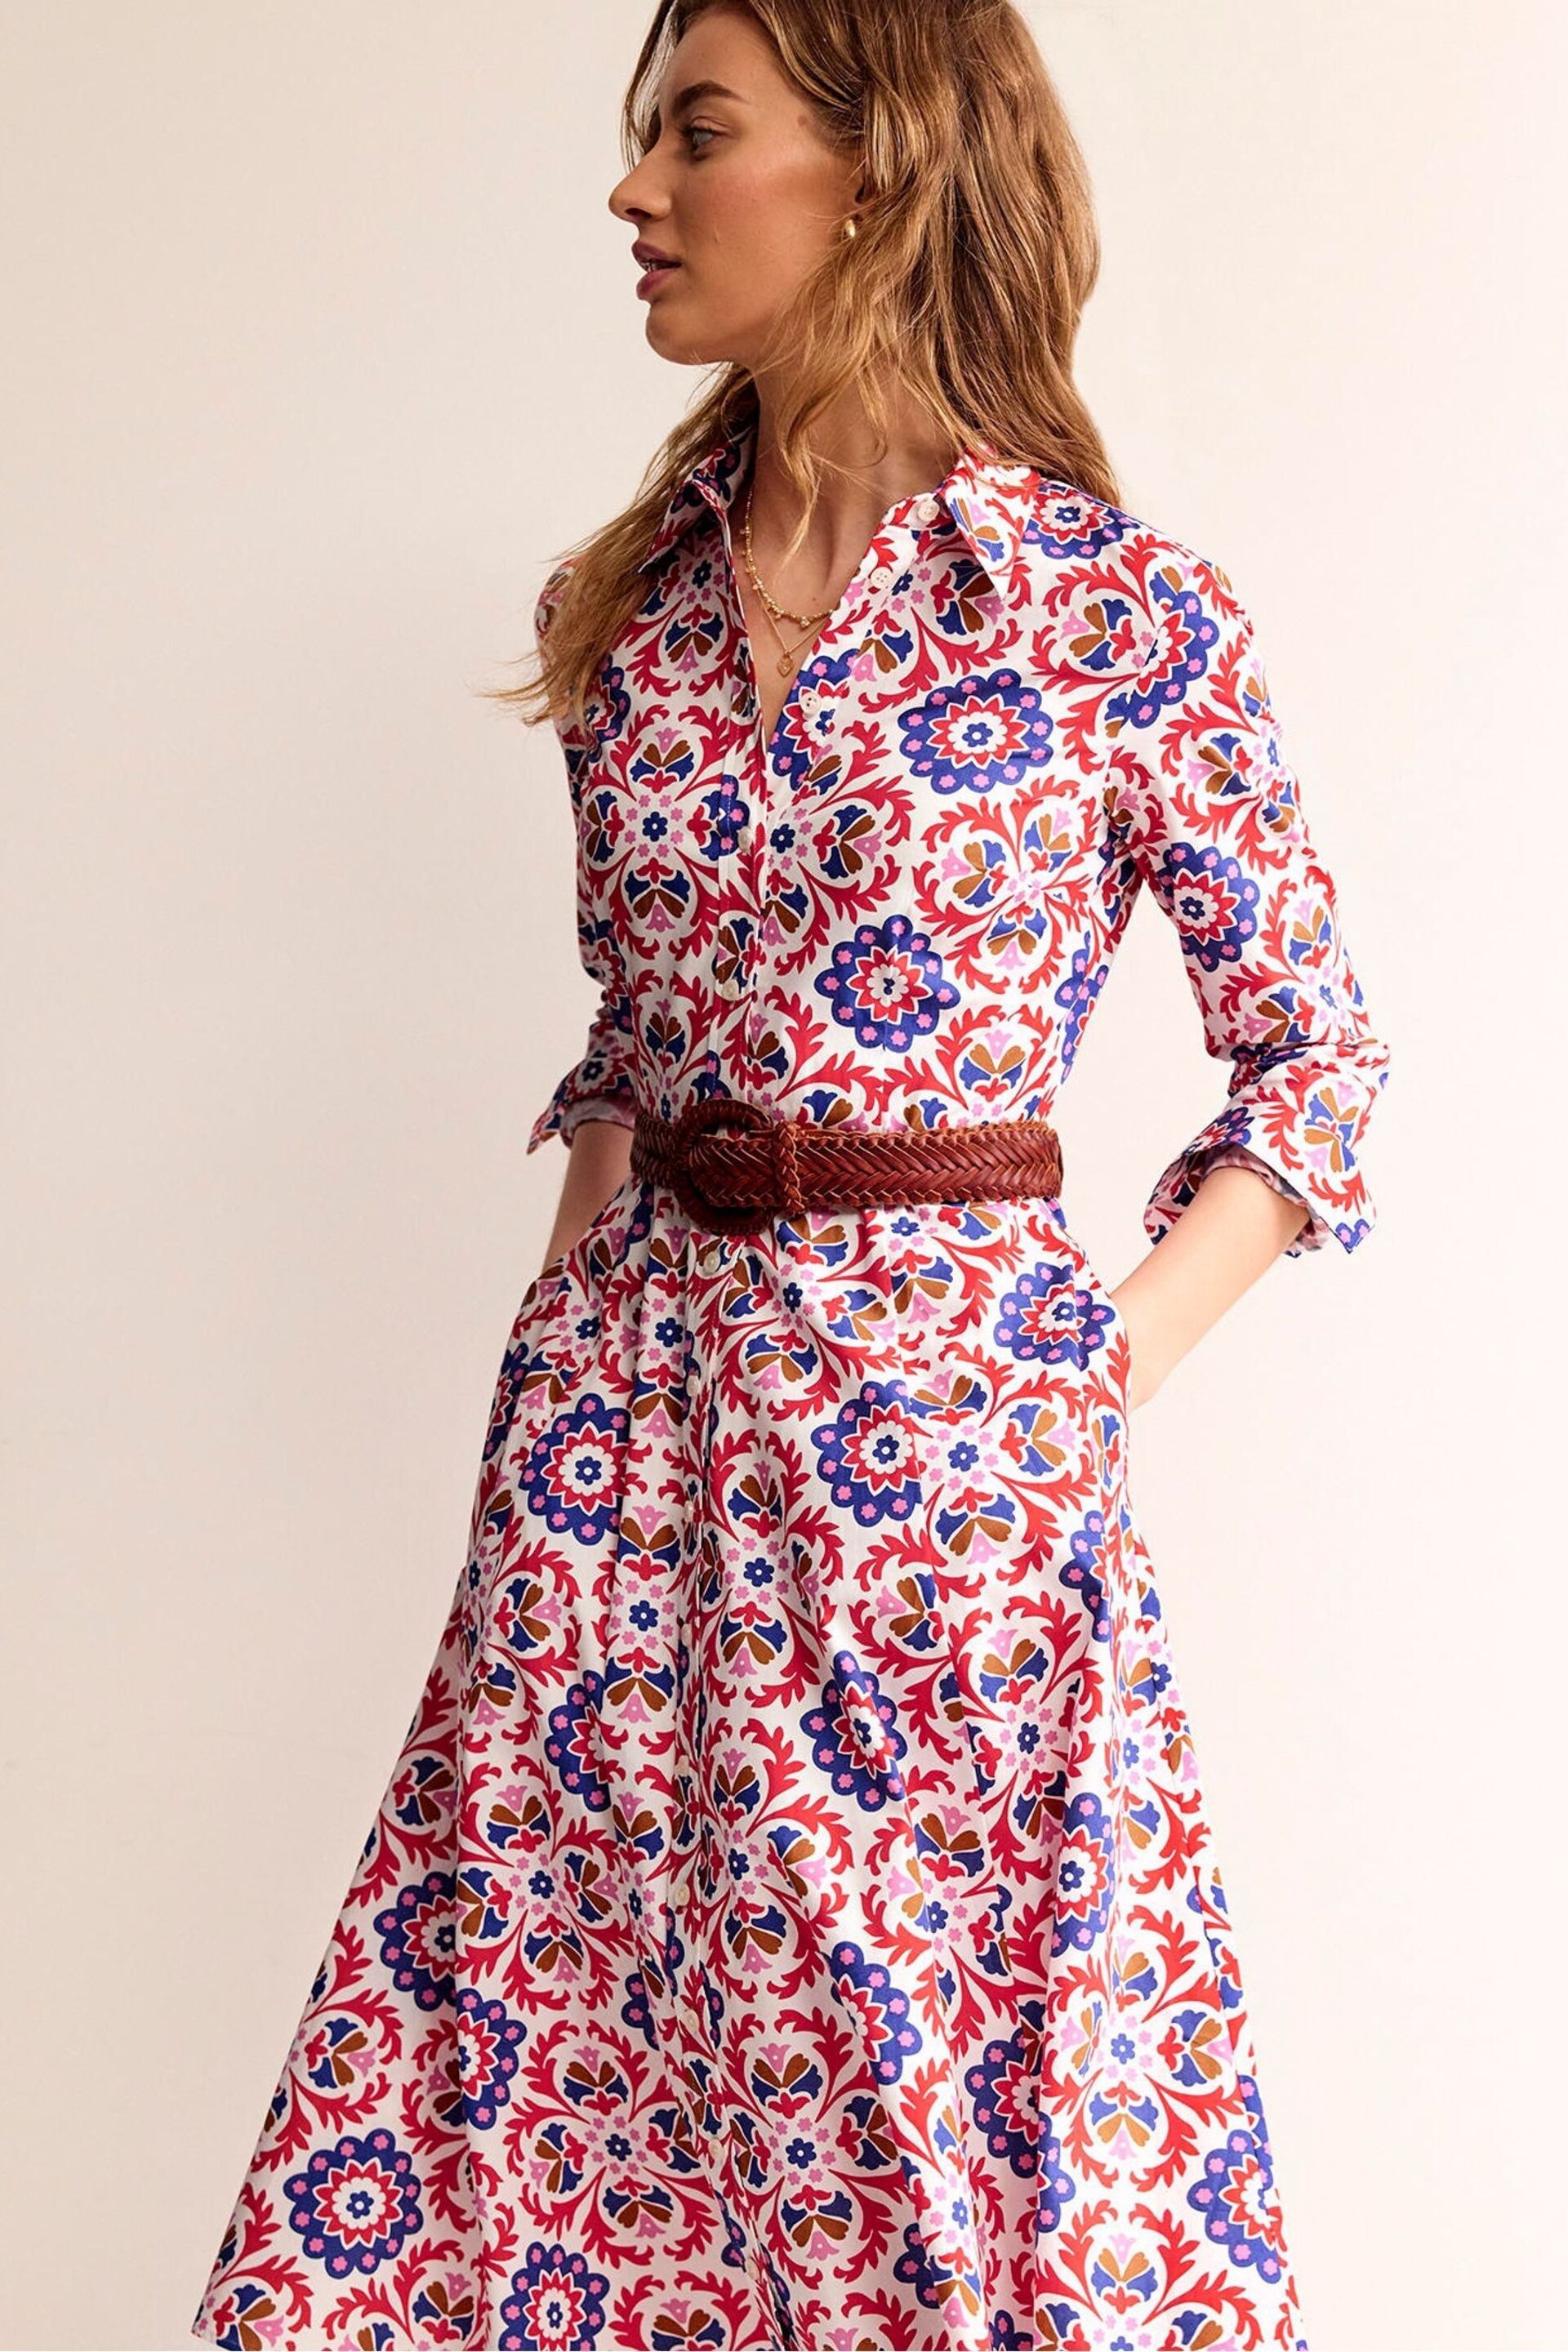 Boden Red Amy Cotton Midi Shirt Dress - Image 2 of 6